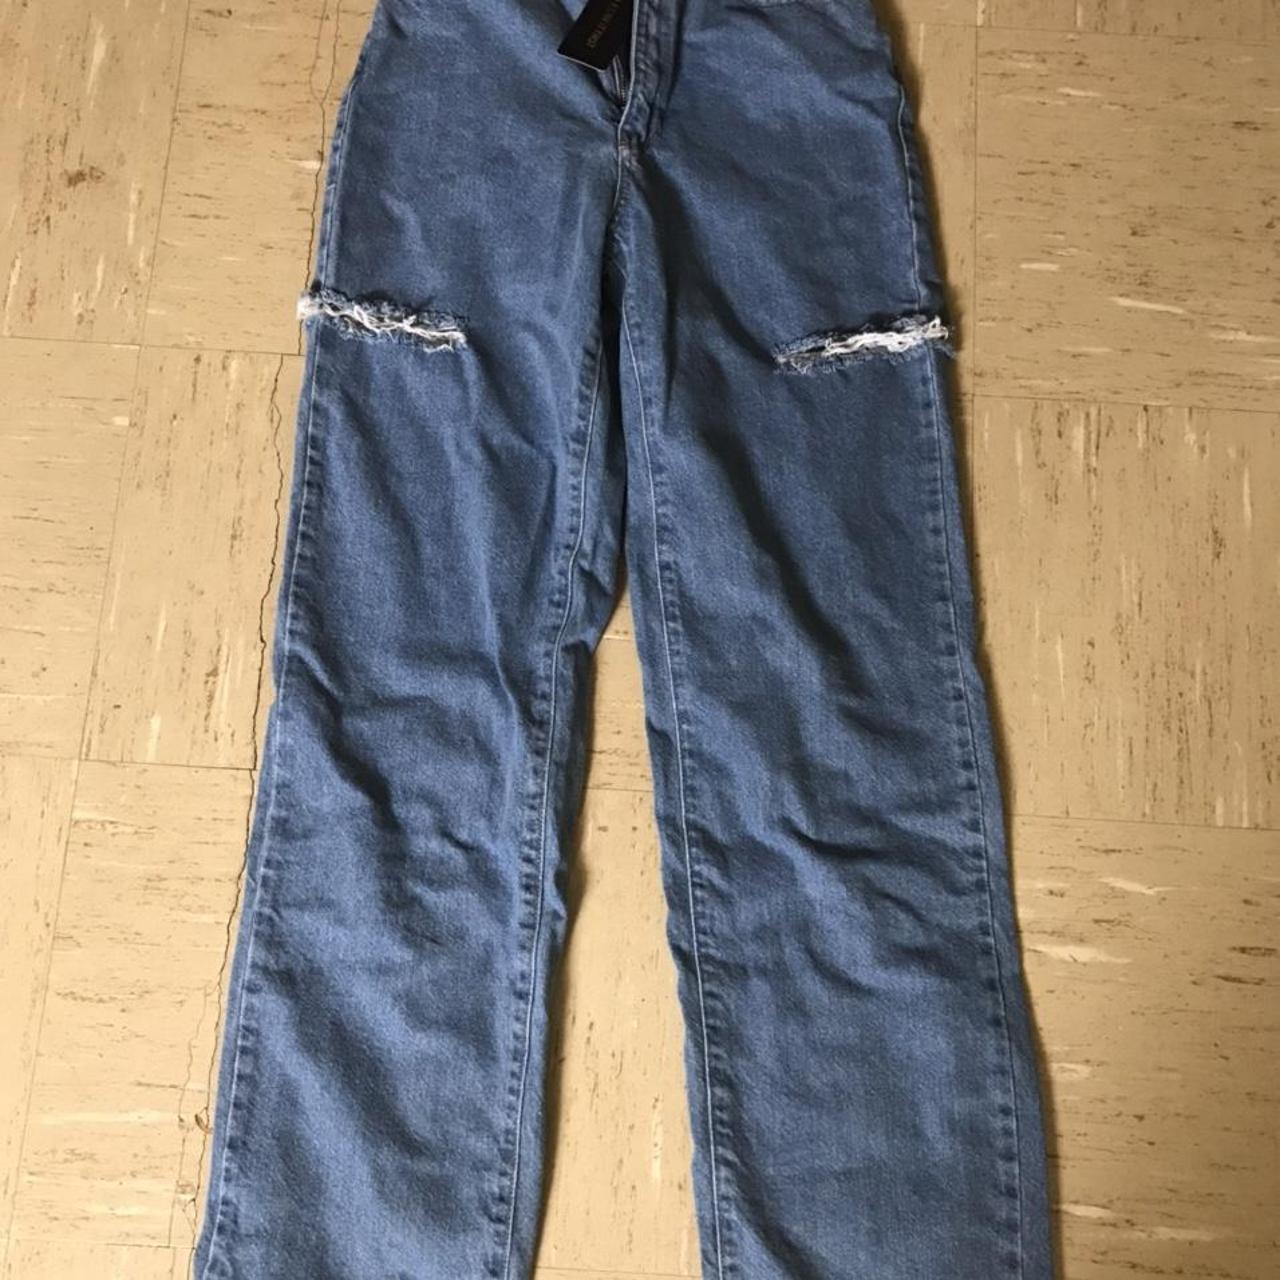 I Saw It First Women's Blue Jeans (3)